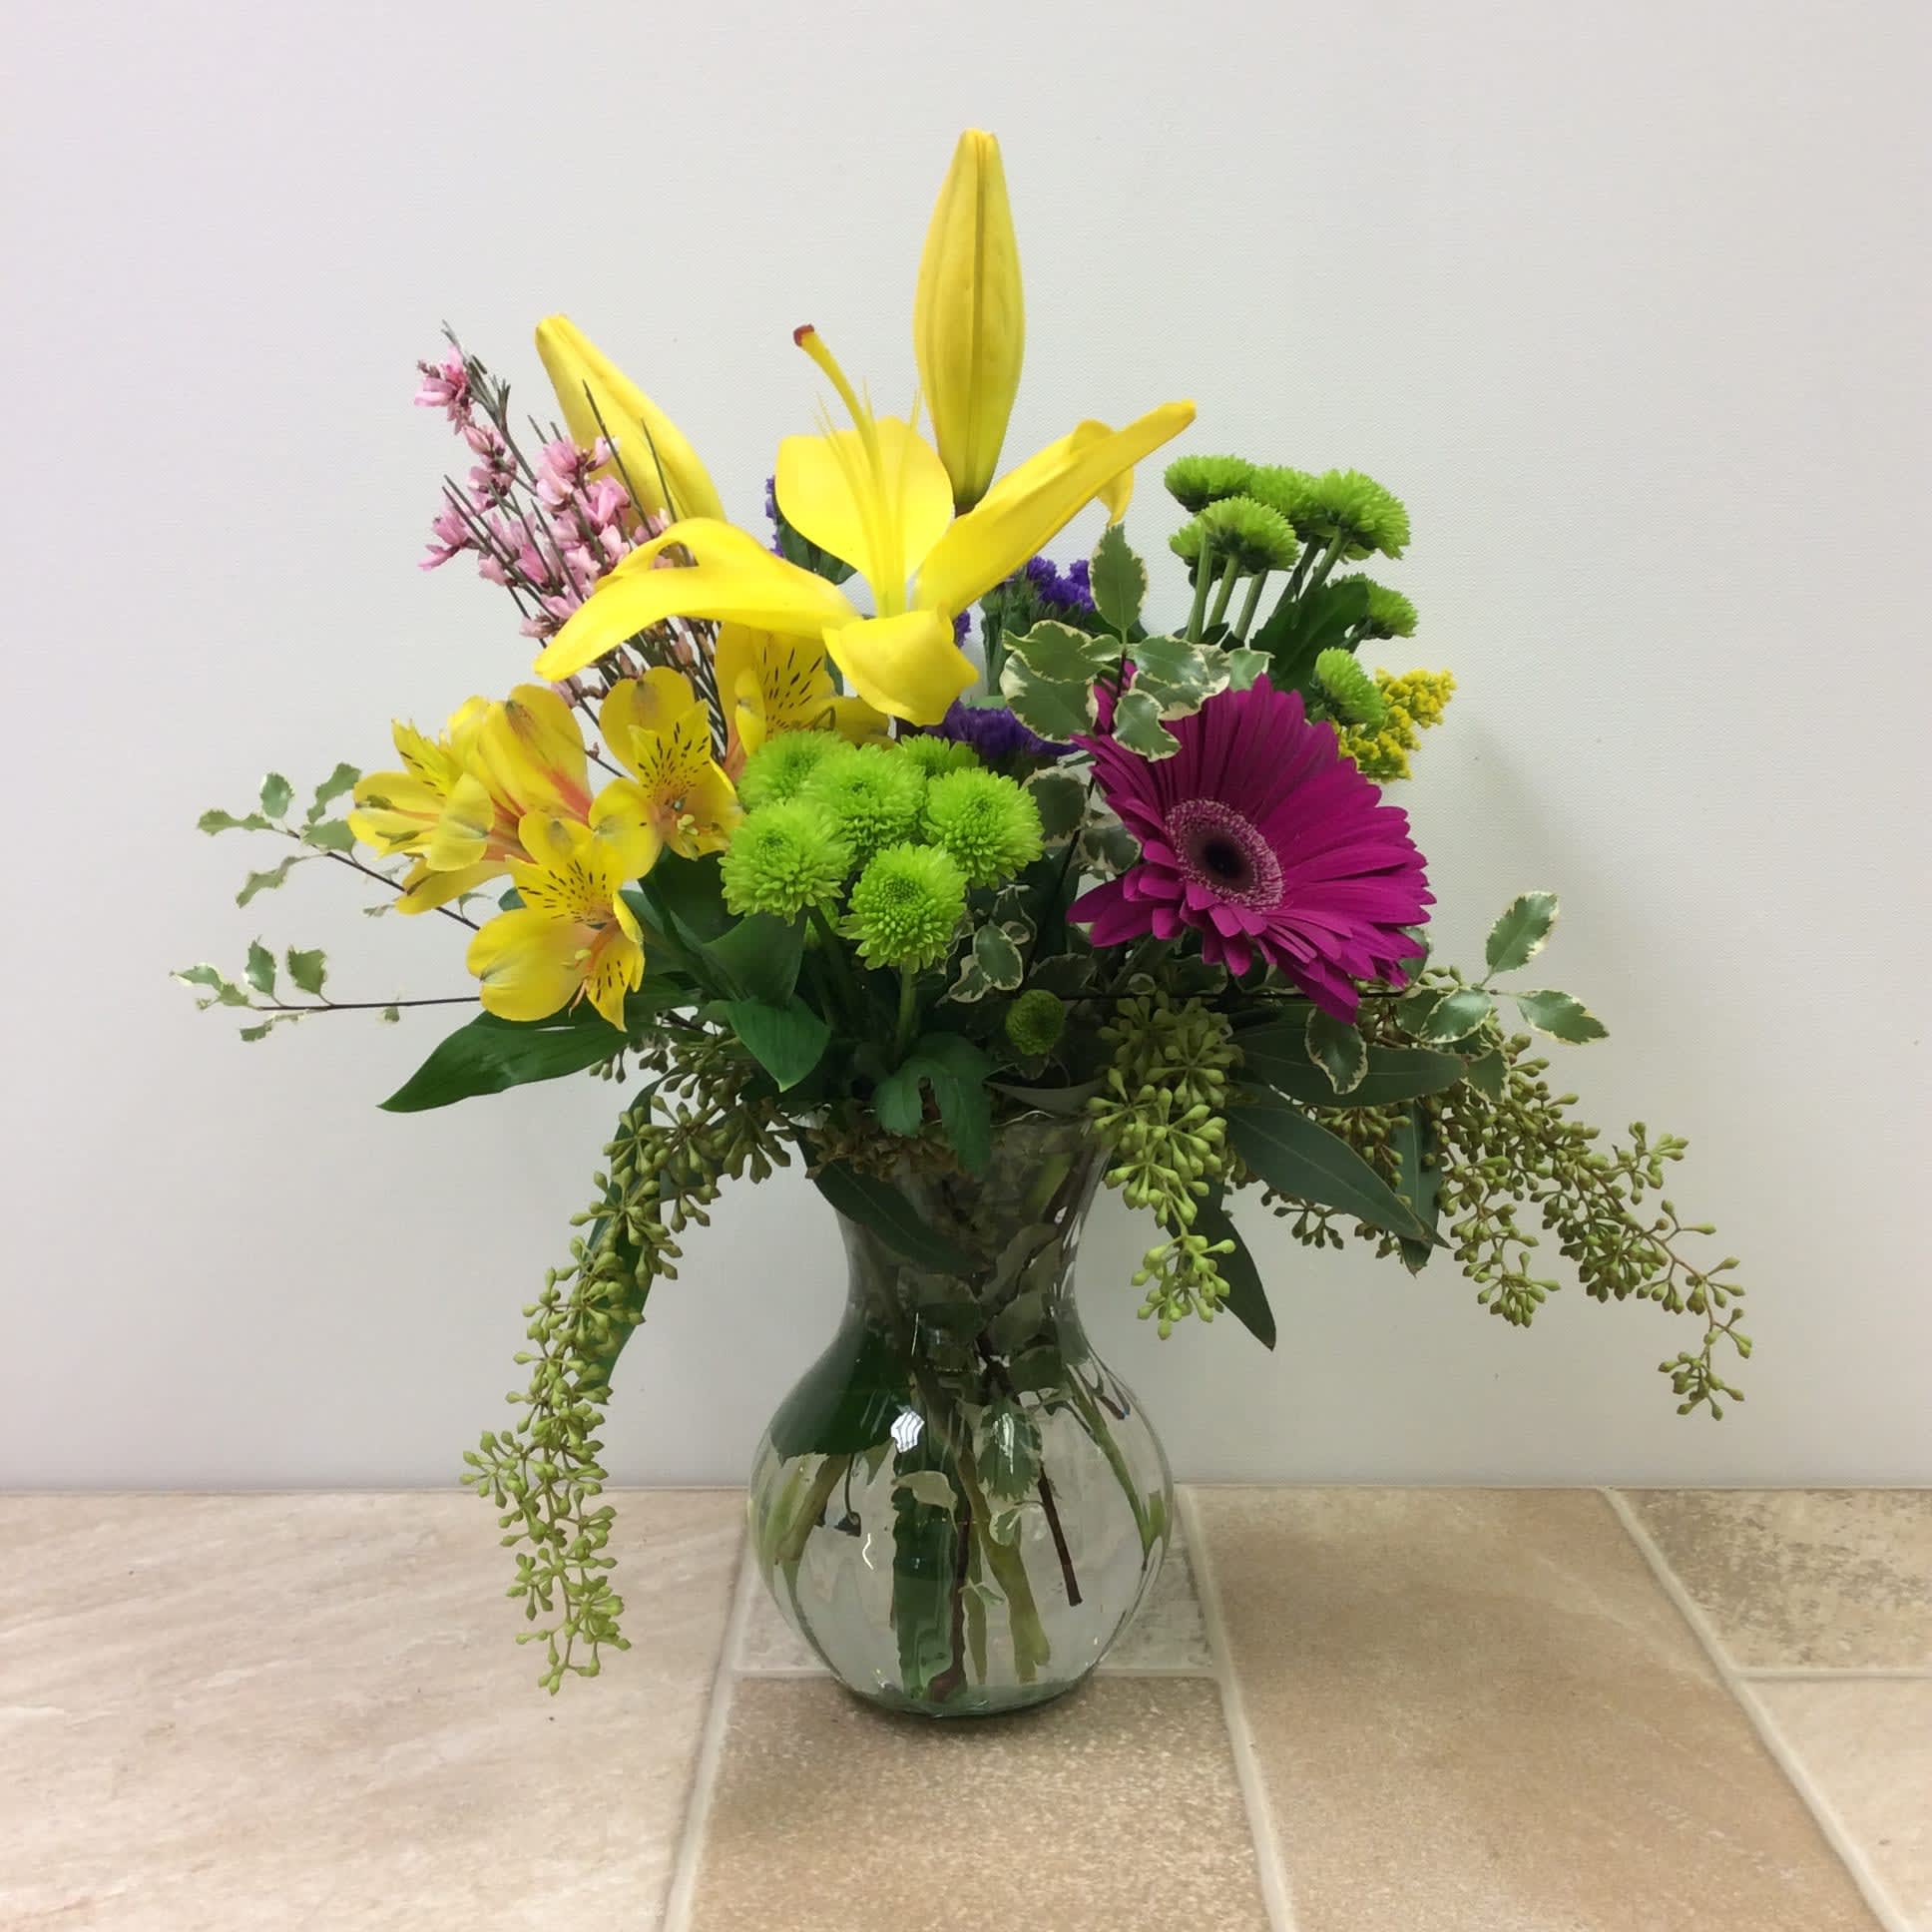 Ella - A pretty clear vase filled with asiatic lilies,alstroemerias,gerbera daisies, fragrant genestra, and eucalyptus.